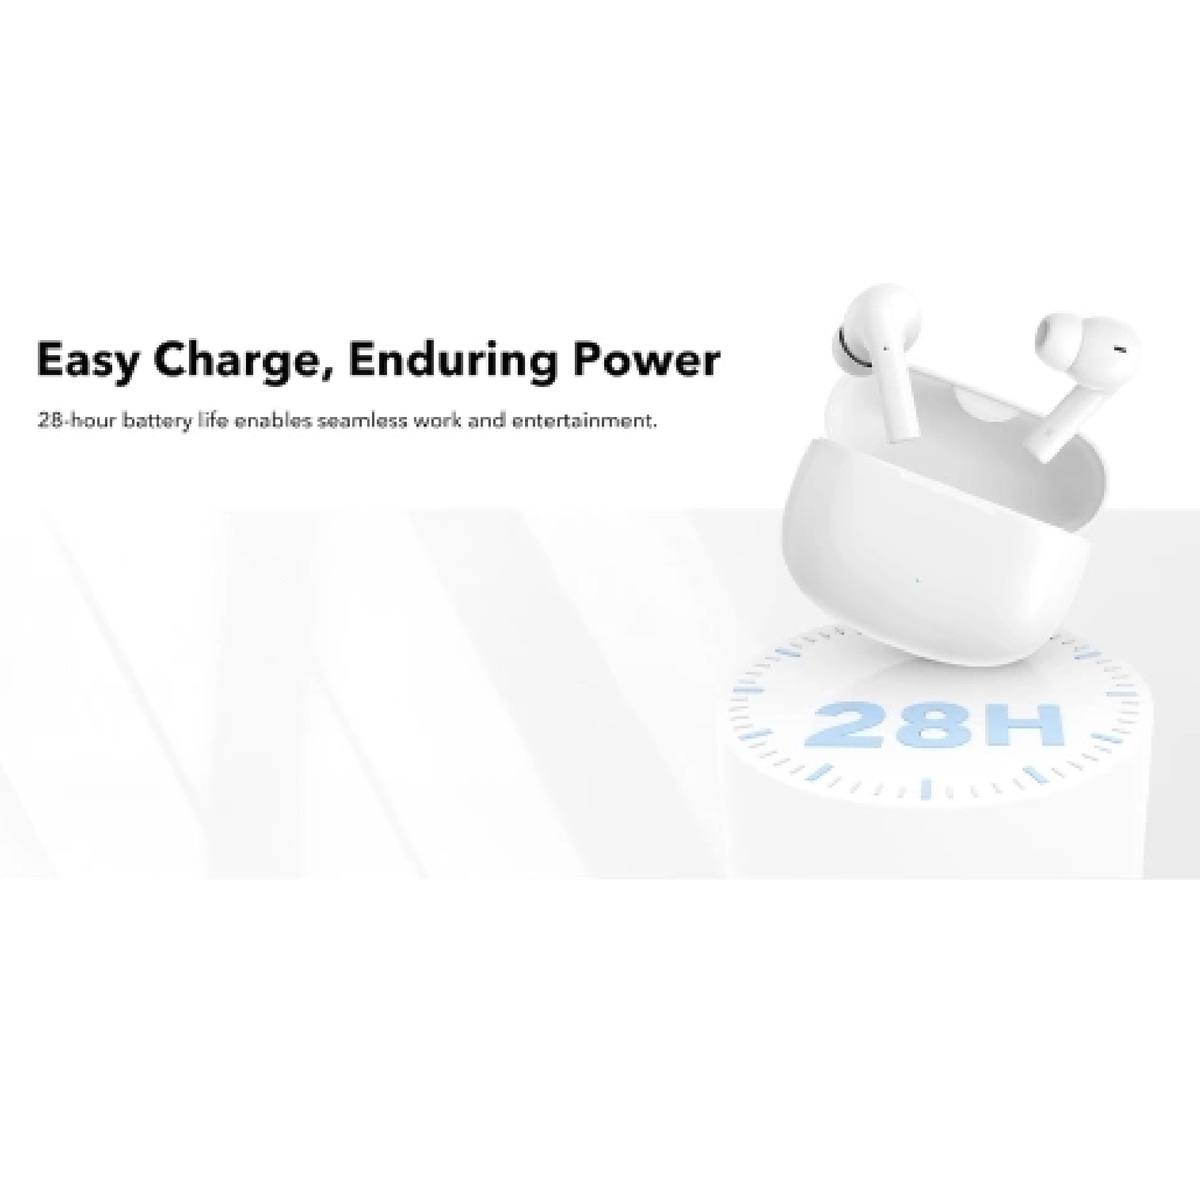 Buy Honor Choice Earbuds X5 - White in Kuwait